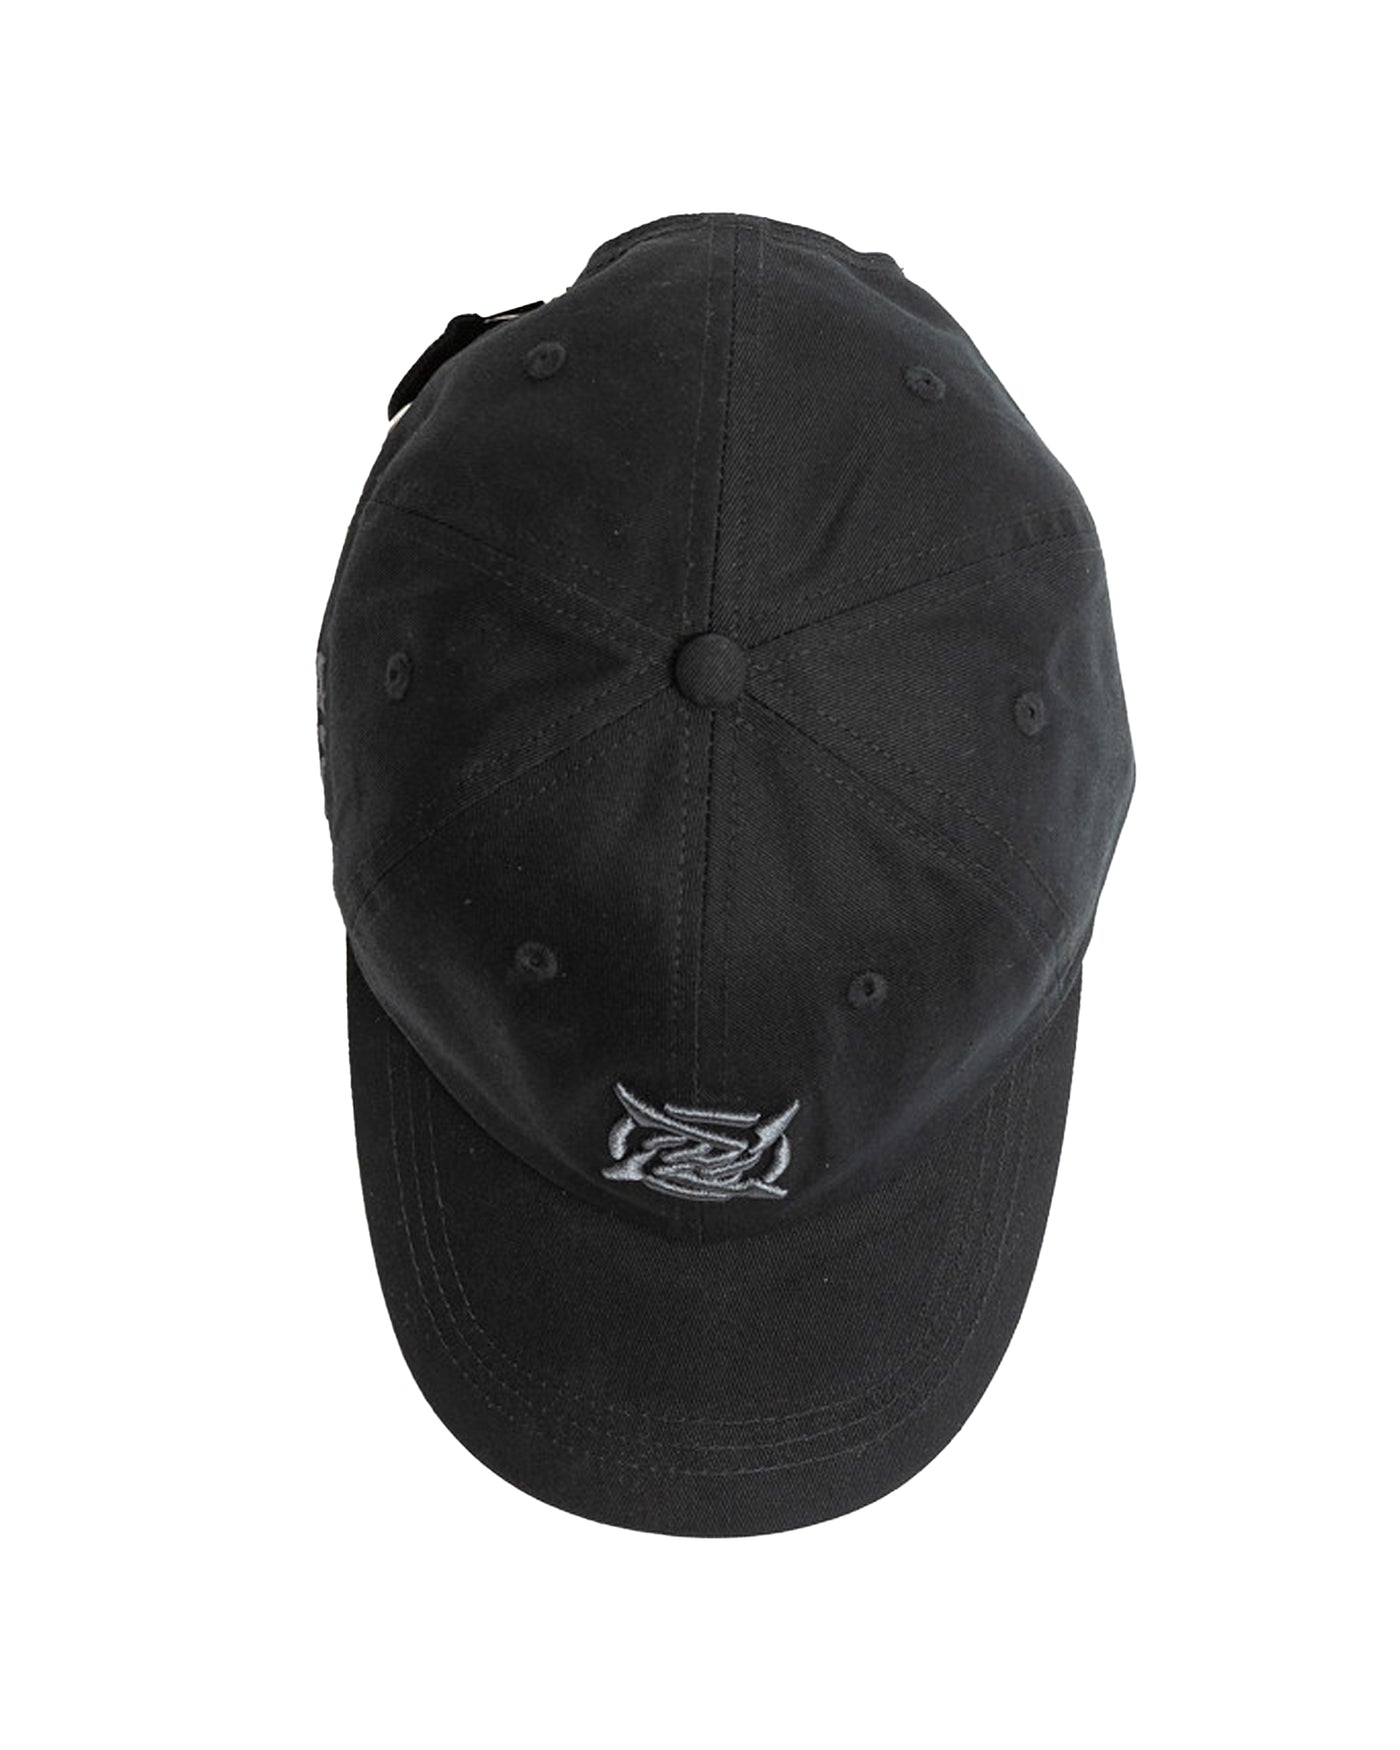 Kurashikku Dad Cap in Black color from Ninjas in Pyjamas merch. This stylish cap is perfect for casual wear and showing support for NiP. A fashionable and practical accessory for fans and gamers alike.